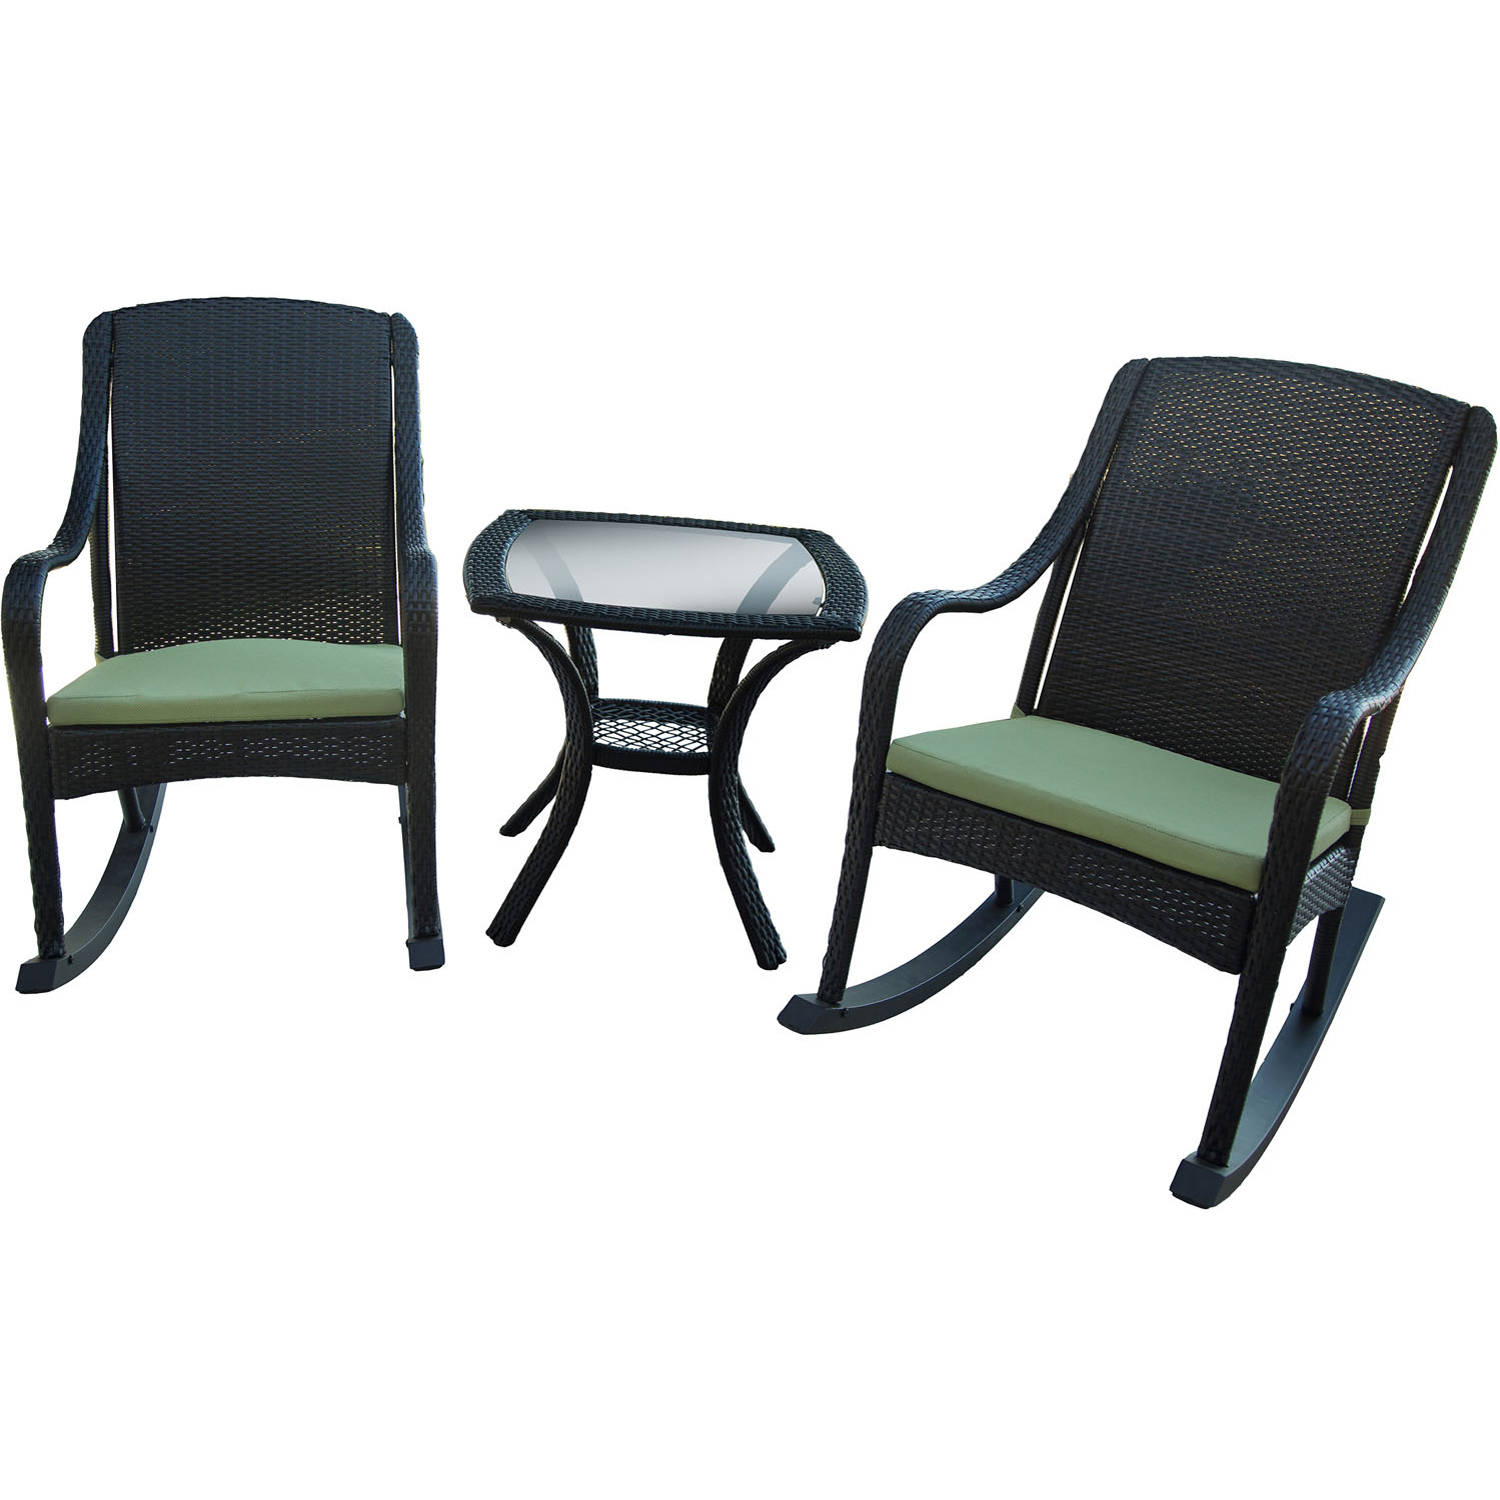 Hanover Outdoor Orleans 3-Piece Porch Rocker Set with Cushions, Avocado Green/French Roast - image 2 of 4